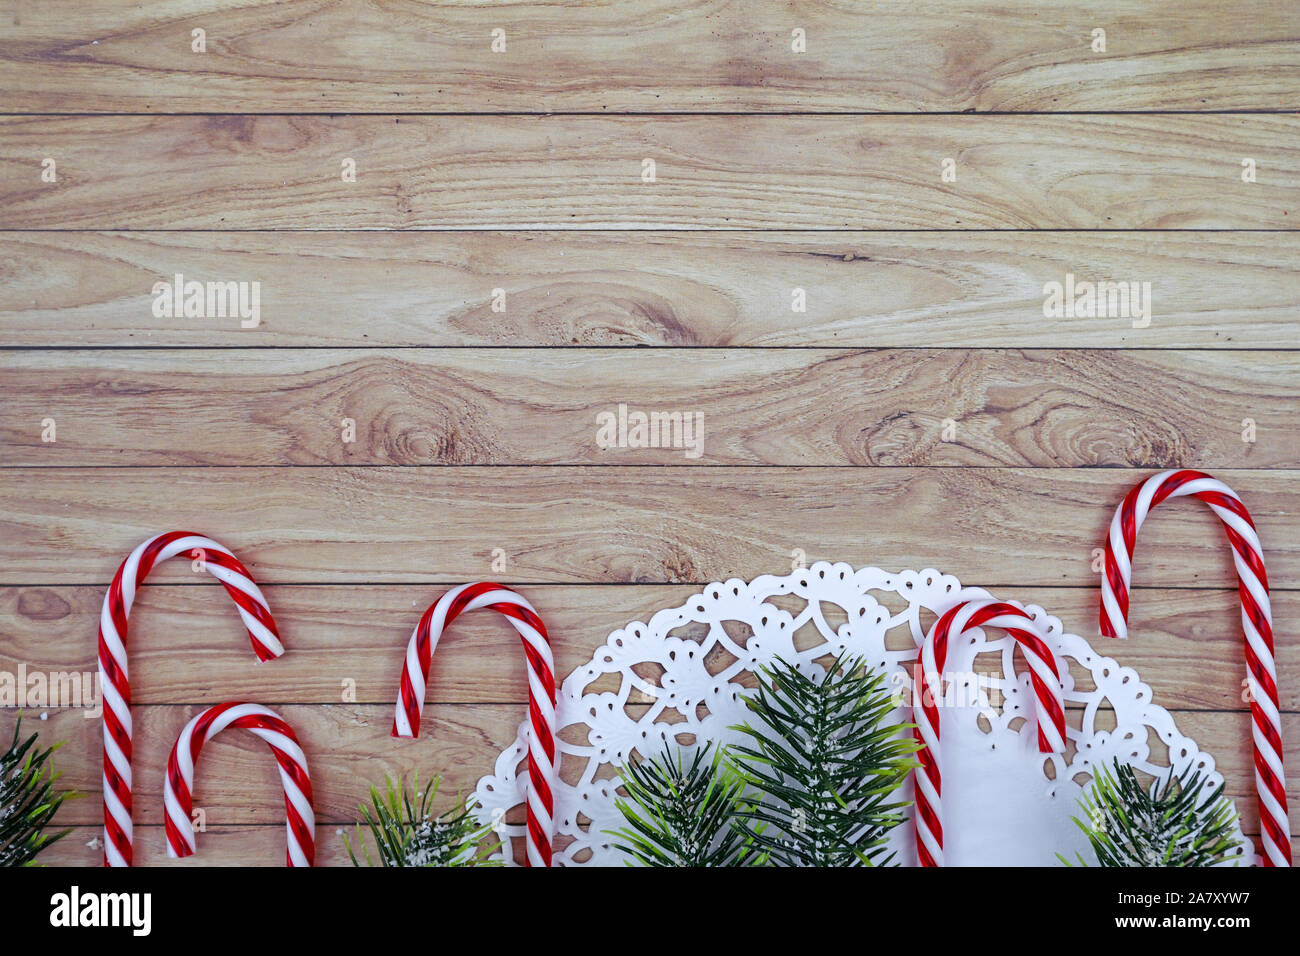 Seasonal Christmas flat lay with white lace doily, candy canes and fir branches with snow on wooden copy space background Stock Photo